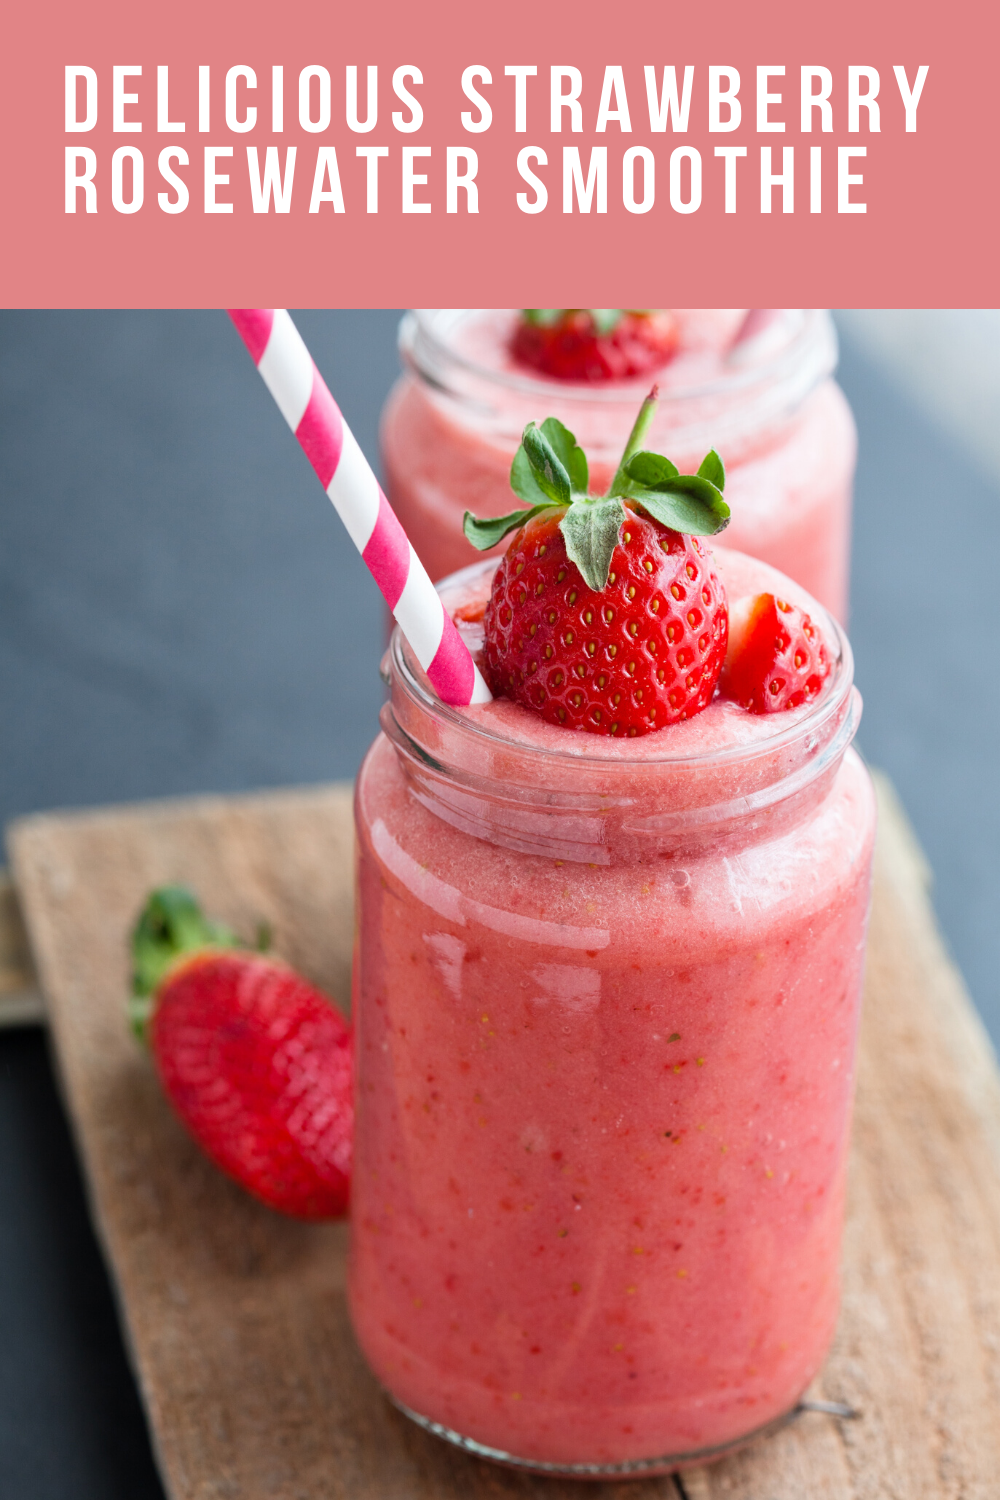 This strawberry rosewater smoothie is delicious and so easy, it is worth a try. The smoothie is also vegan friendly and gluten-free. Win-win, right? 